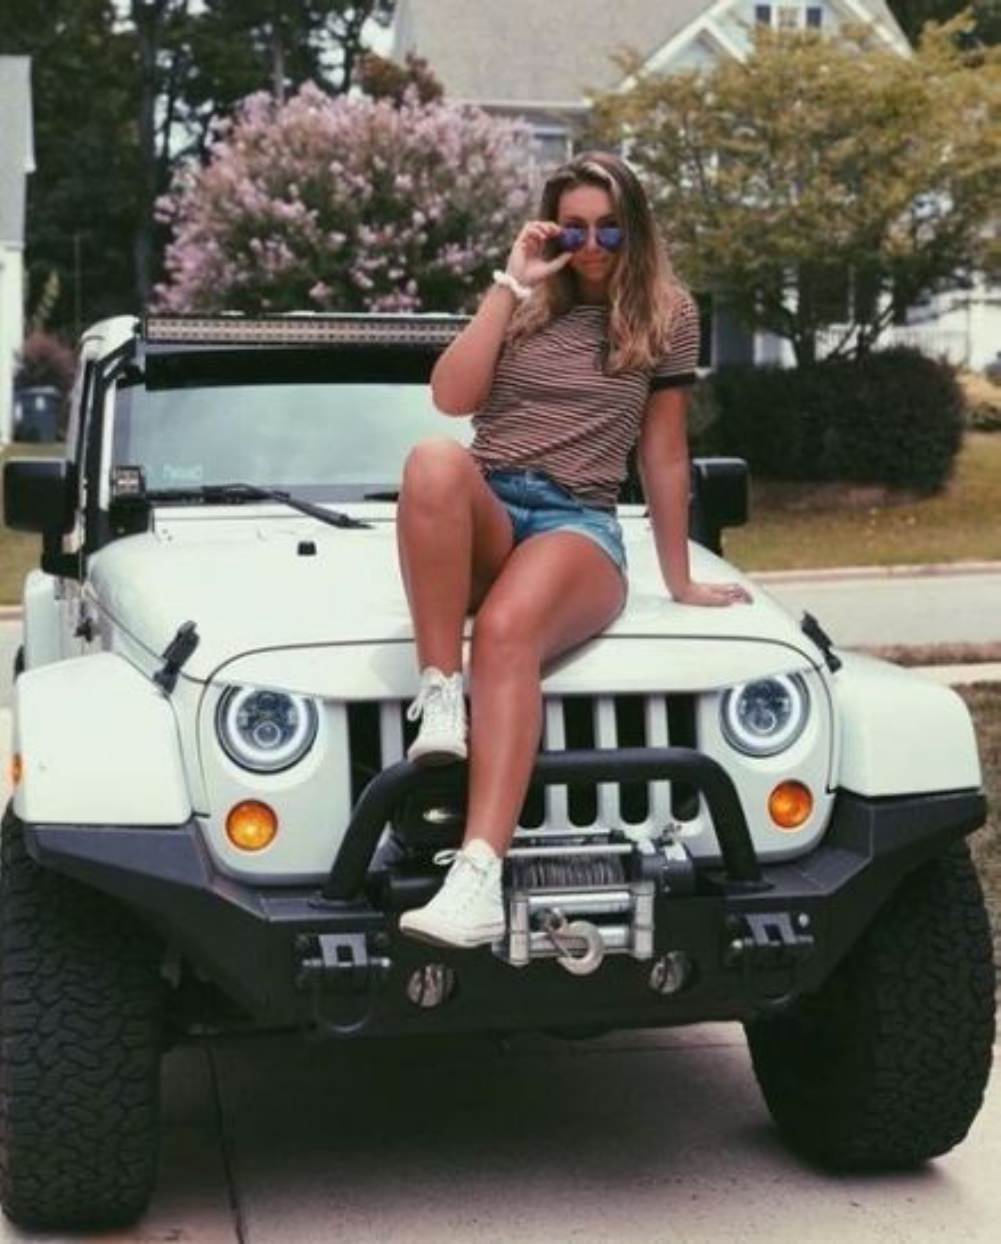 A Jeep Thing